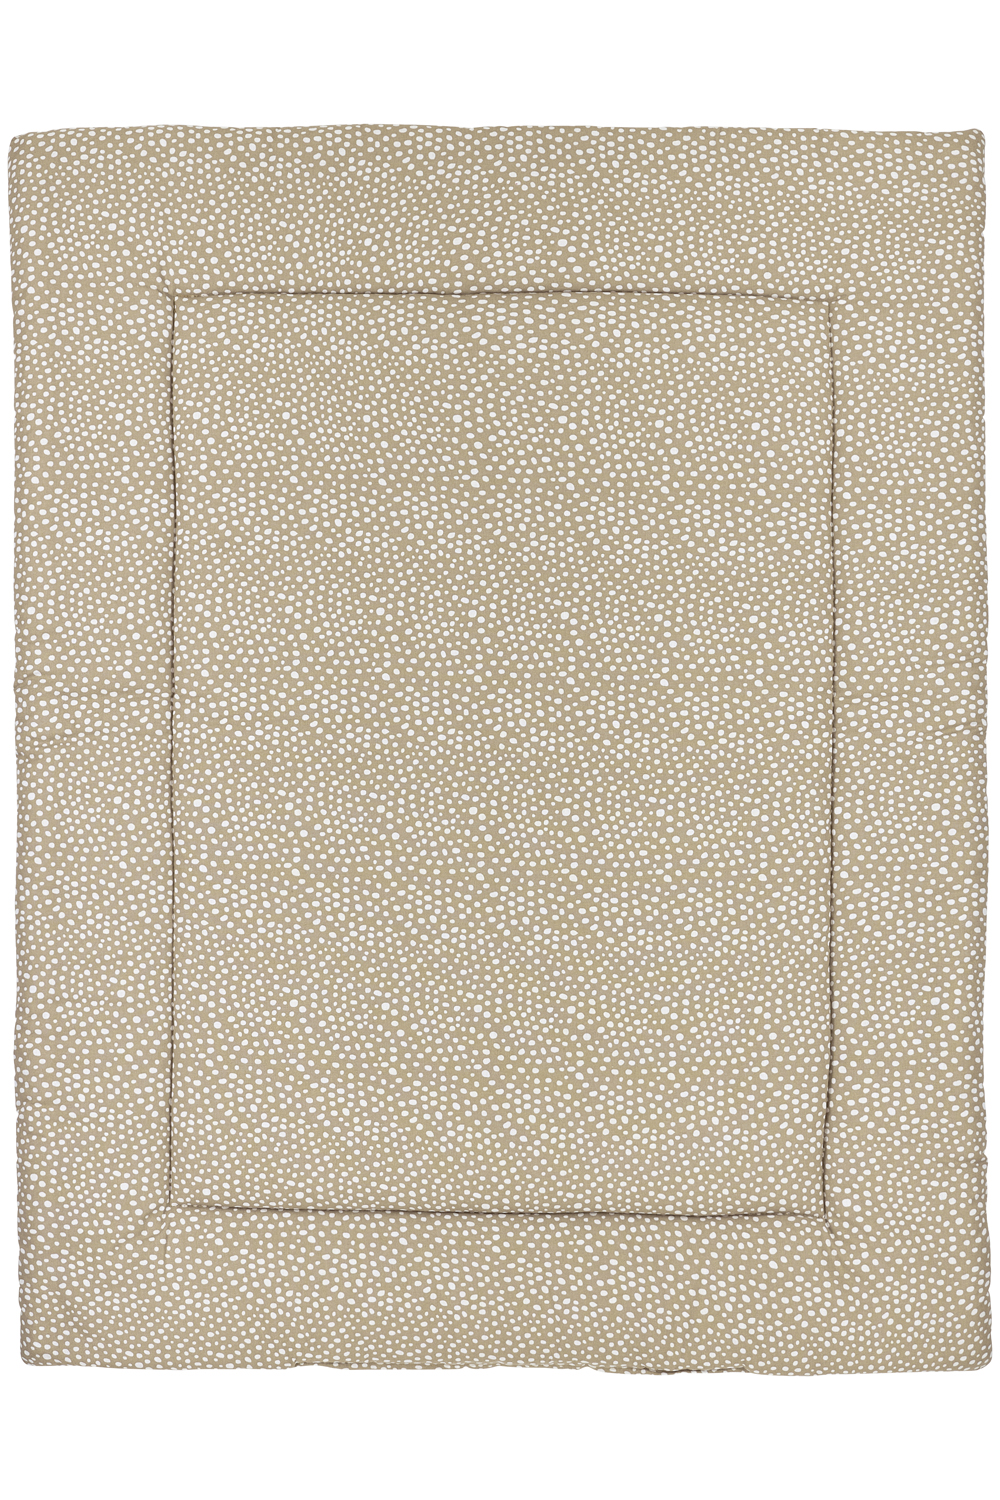 Boxkleed - taupe - 80x100cm